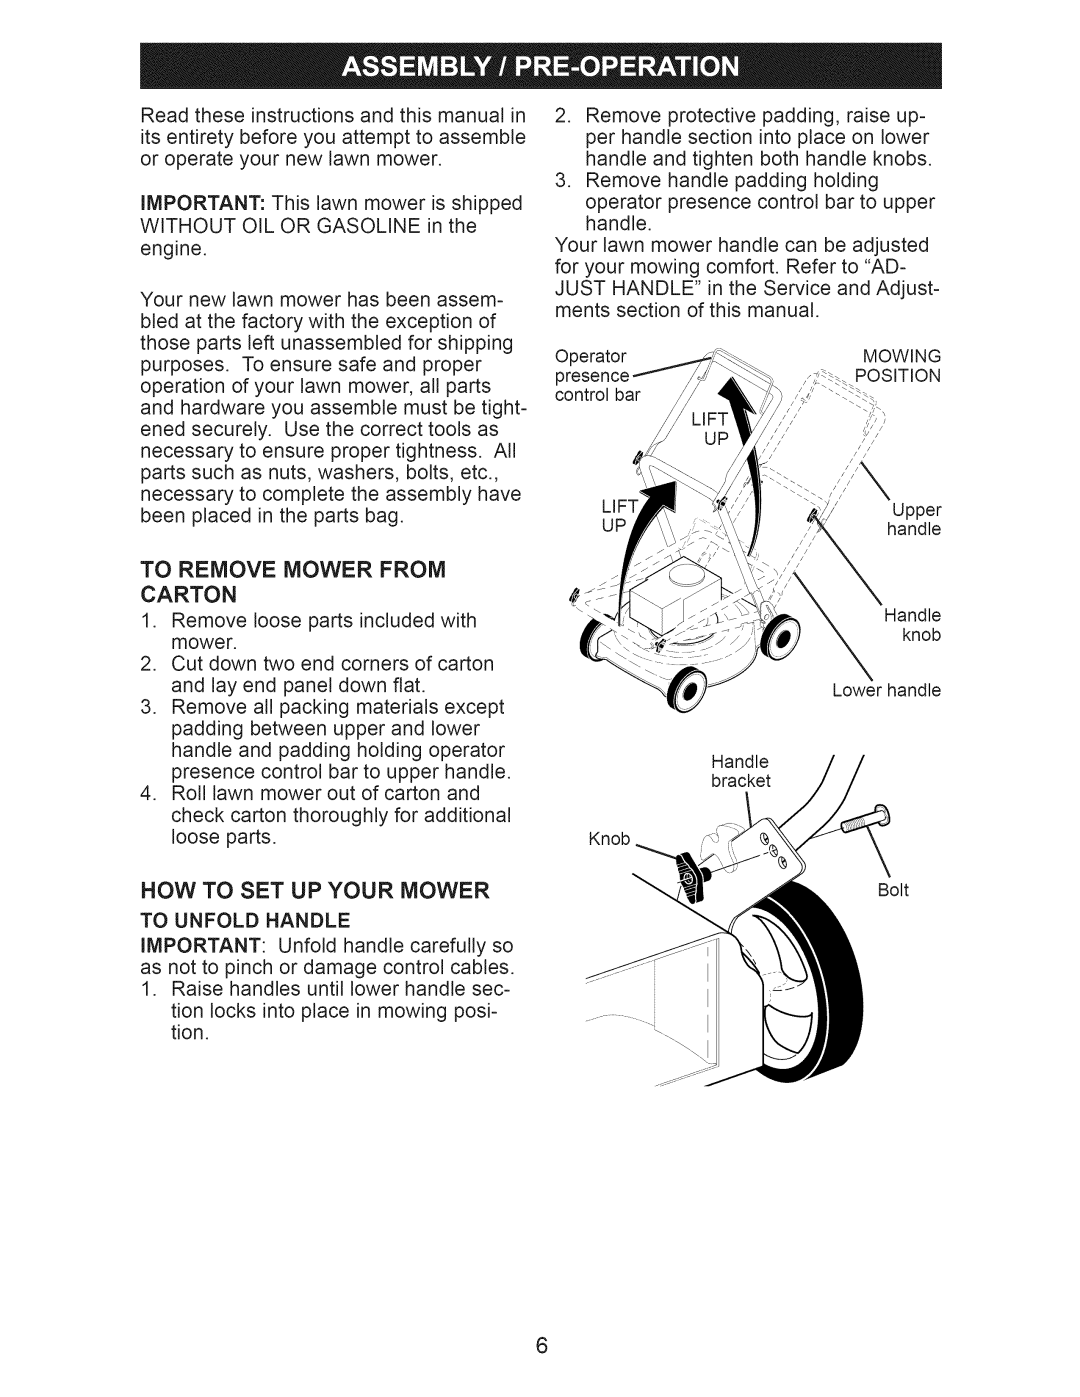 Craftsman 917.374365 owner manual Now To Set Up Your Mower, To Remove Mower From Carton 